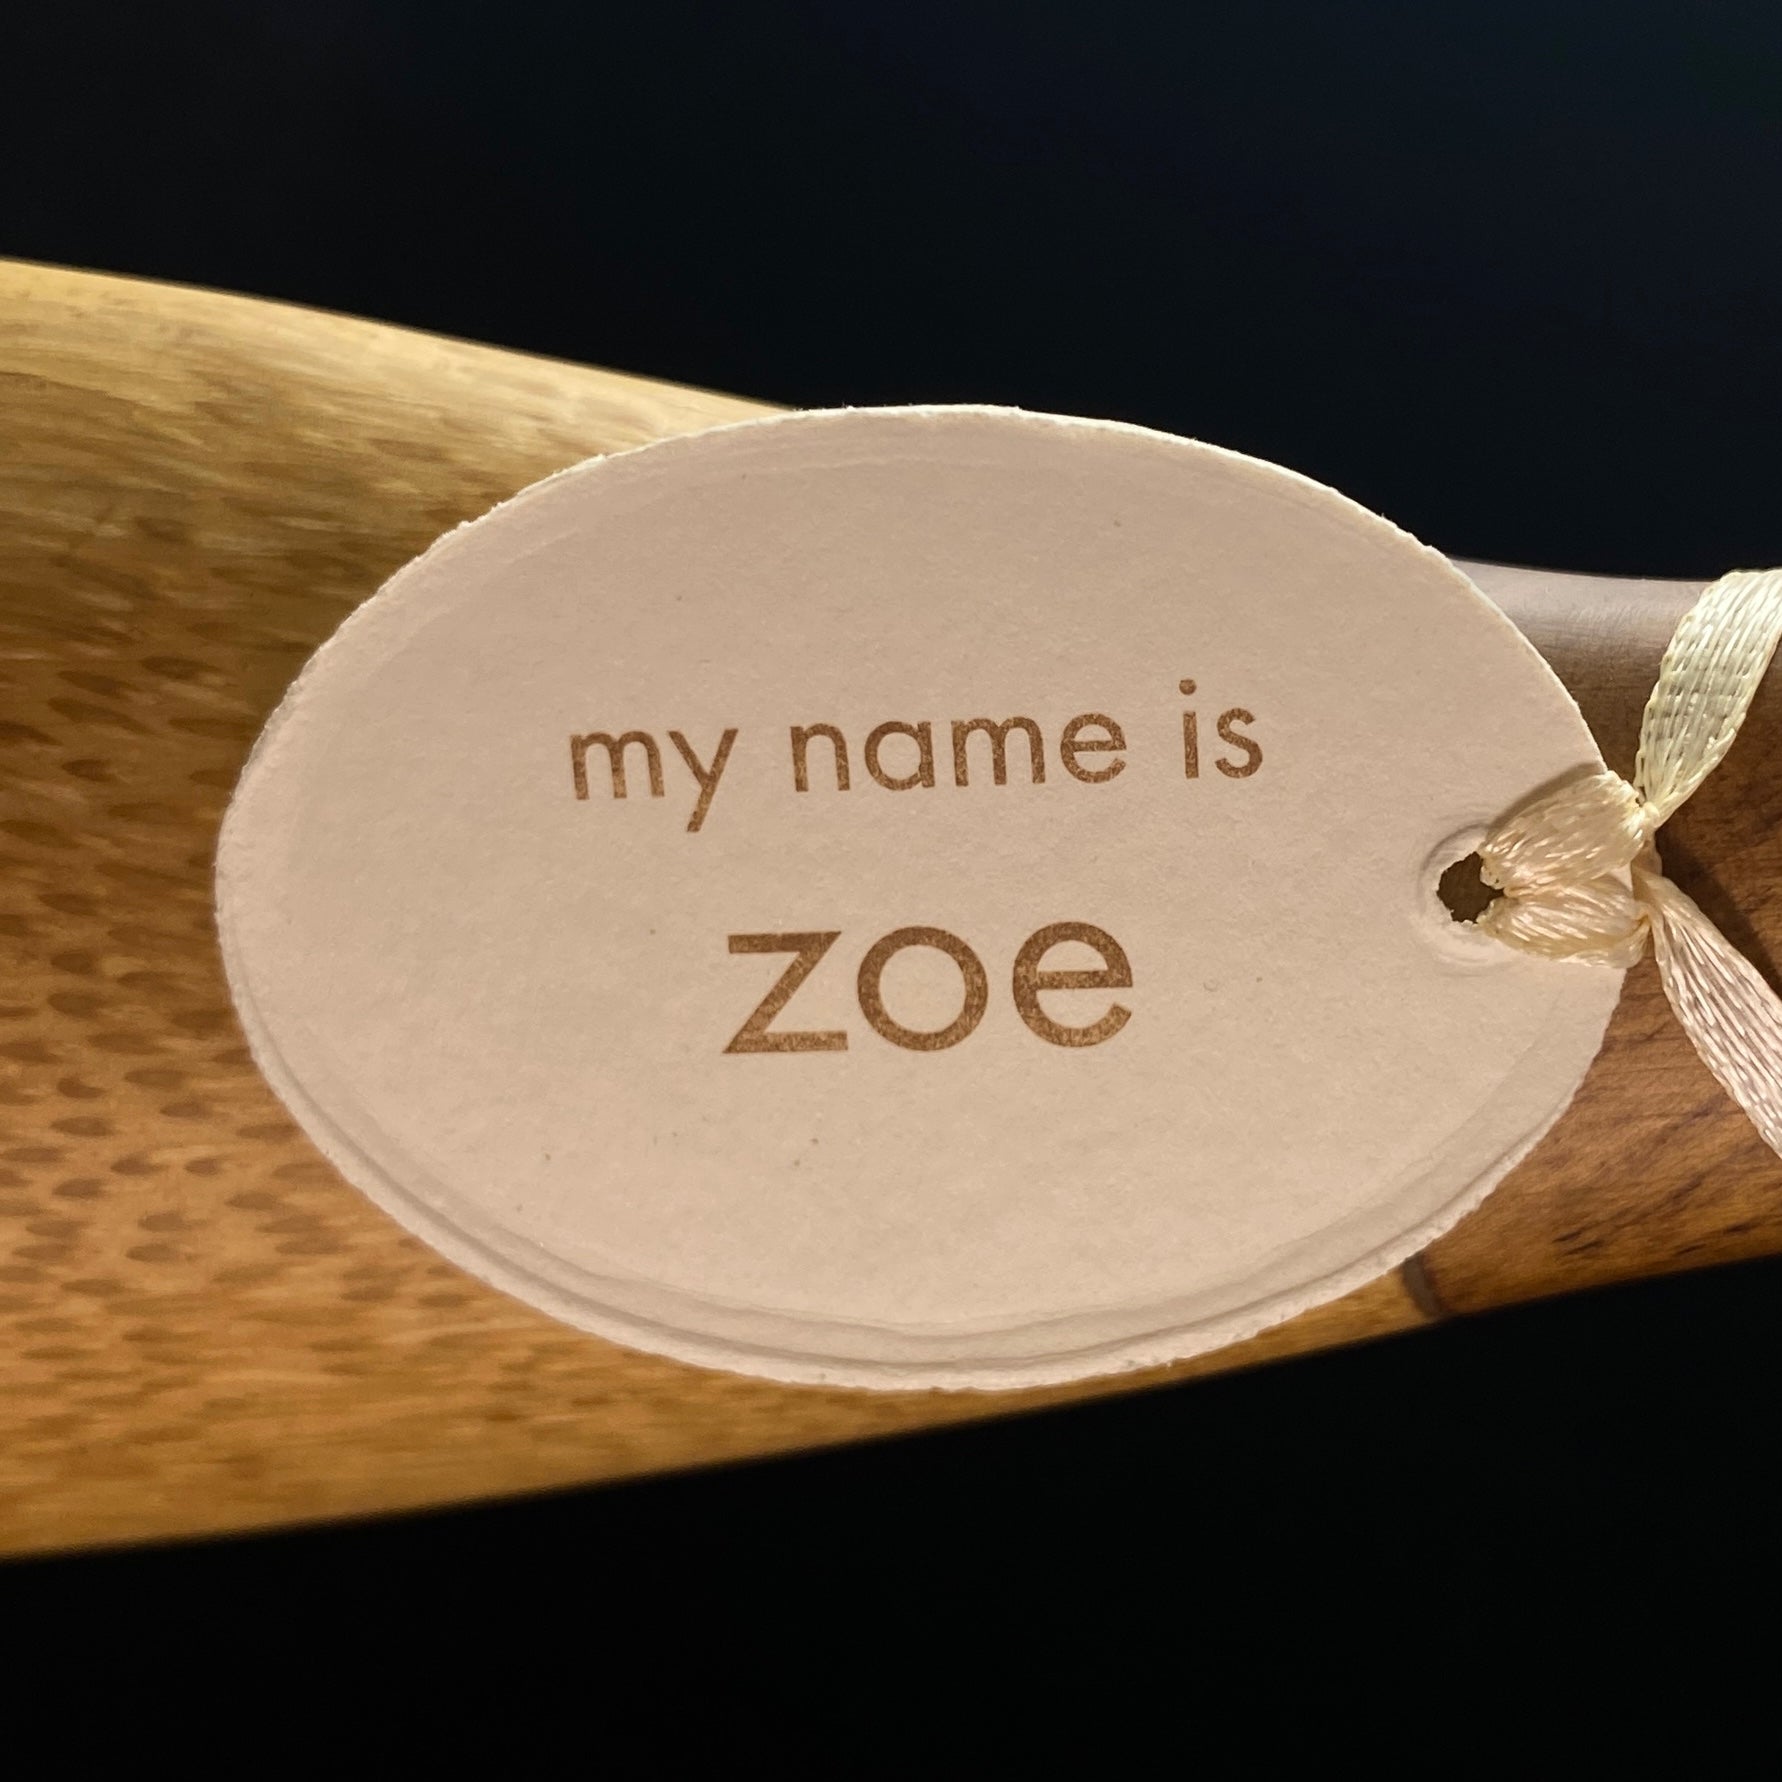 Zoe - Hand-carved and Hand-painted Bamboo Duck with Polka